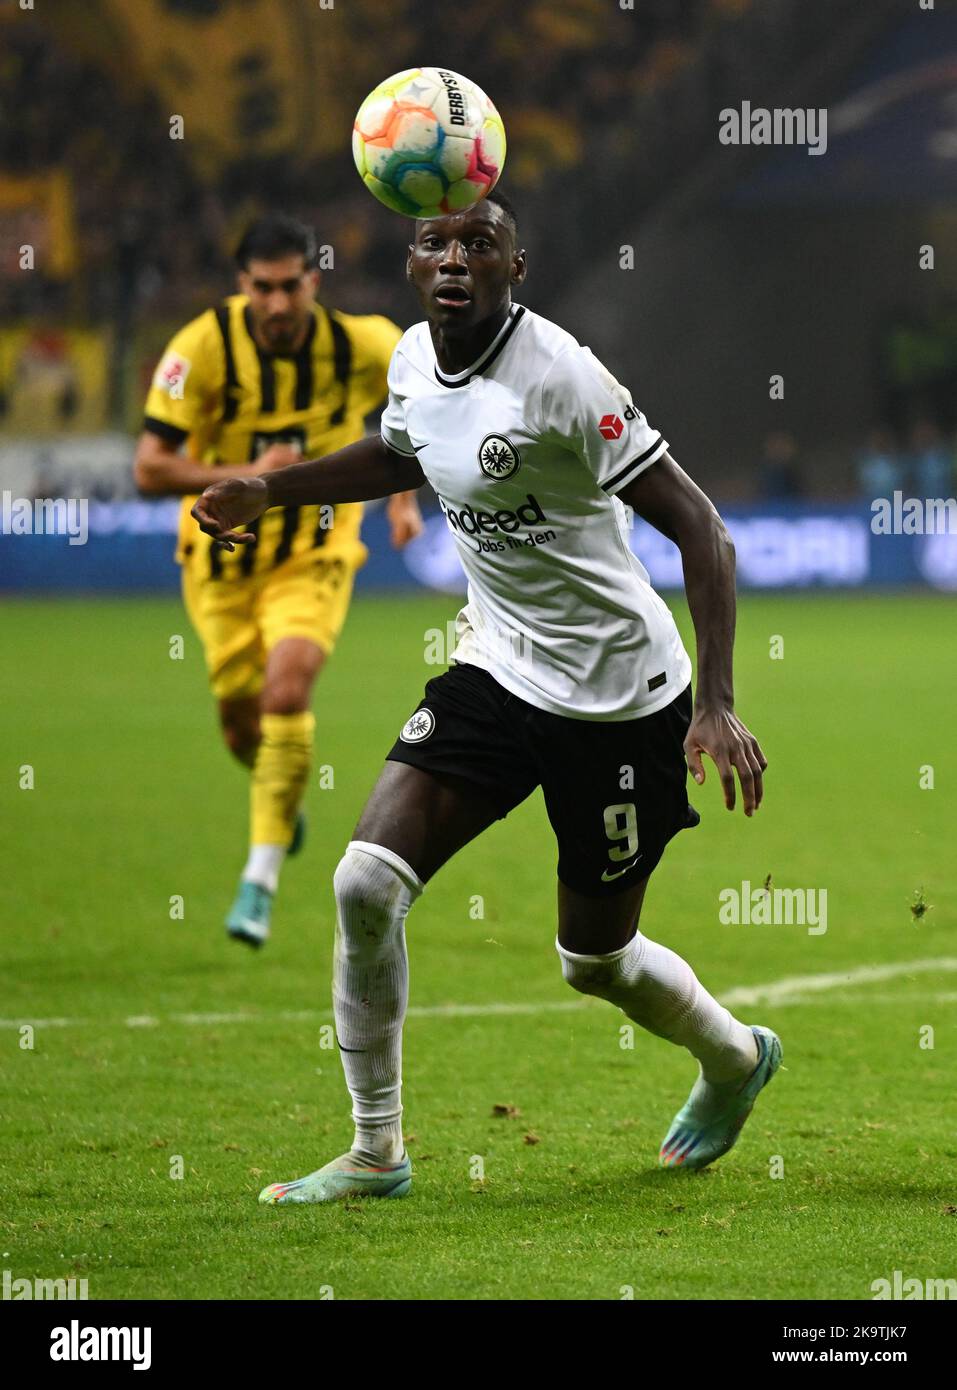 29 October 2022, Hesse, Frankfurt/Main: Soccer: Bundesliga, Eintracht Frankfurt - Borussia Dortmund, Matchday 12 at Deutsche Bank Park. Frankfurt's Randal Kolo Muani in action. Photo: Arne Dedert/dpa - IMPORTANT NOTE: In accordance with the requirements of the DFL Deutsche Fußball Liga and the DFB Deutscher Fußball-Bund, it is prohibited to use or have used photographs taken in the stadium and/or of the match in the form of sequence pictures and/or video-like photo series. Stock Photo